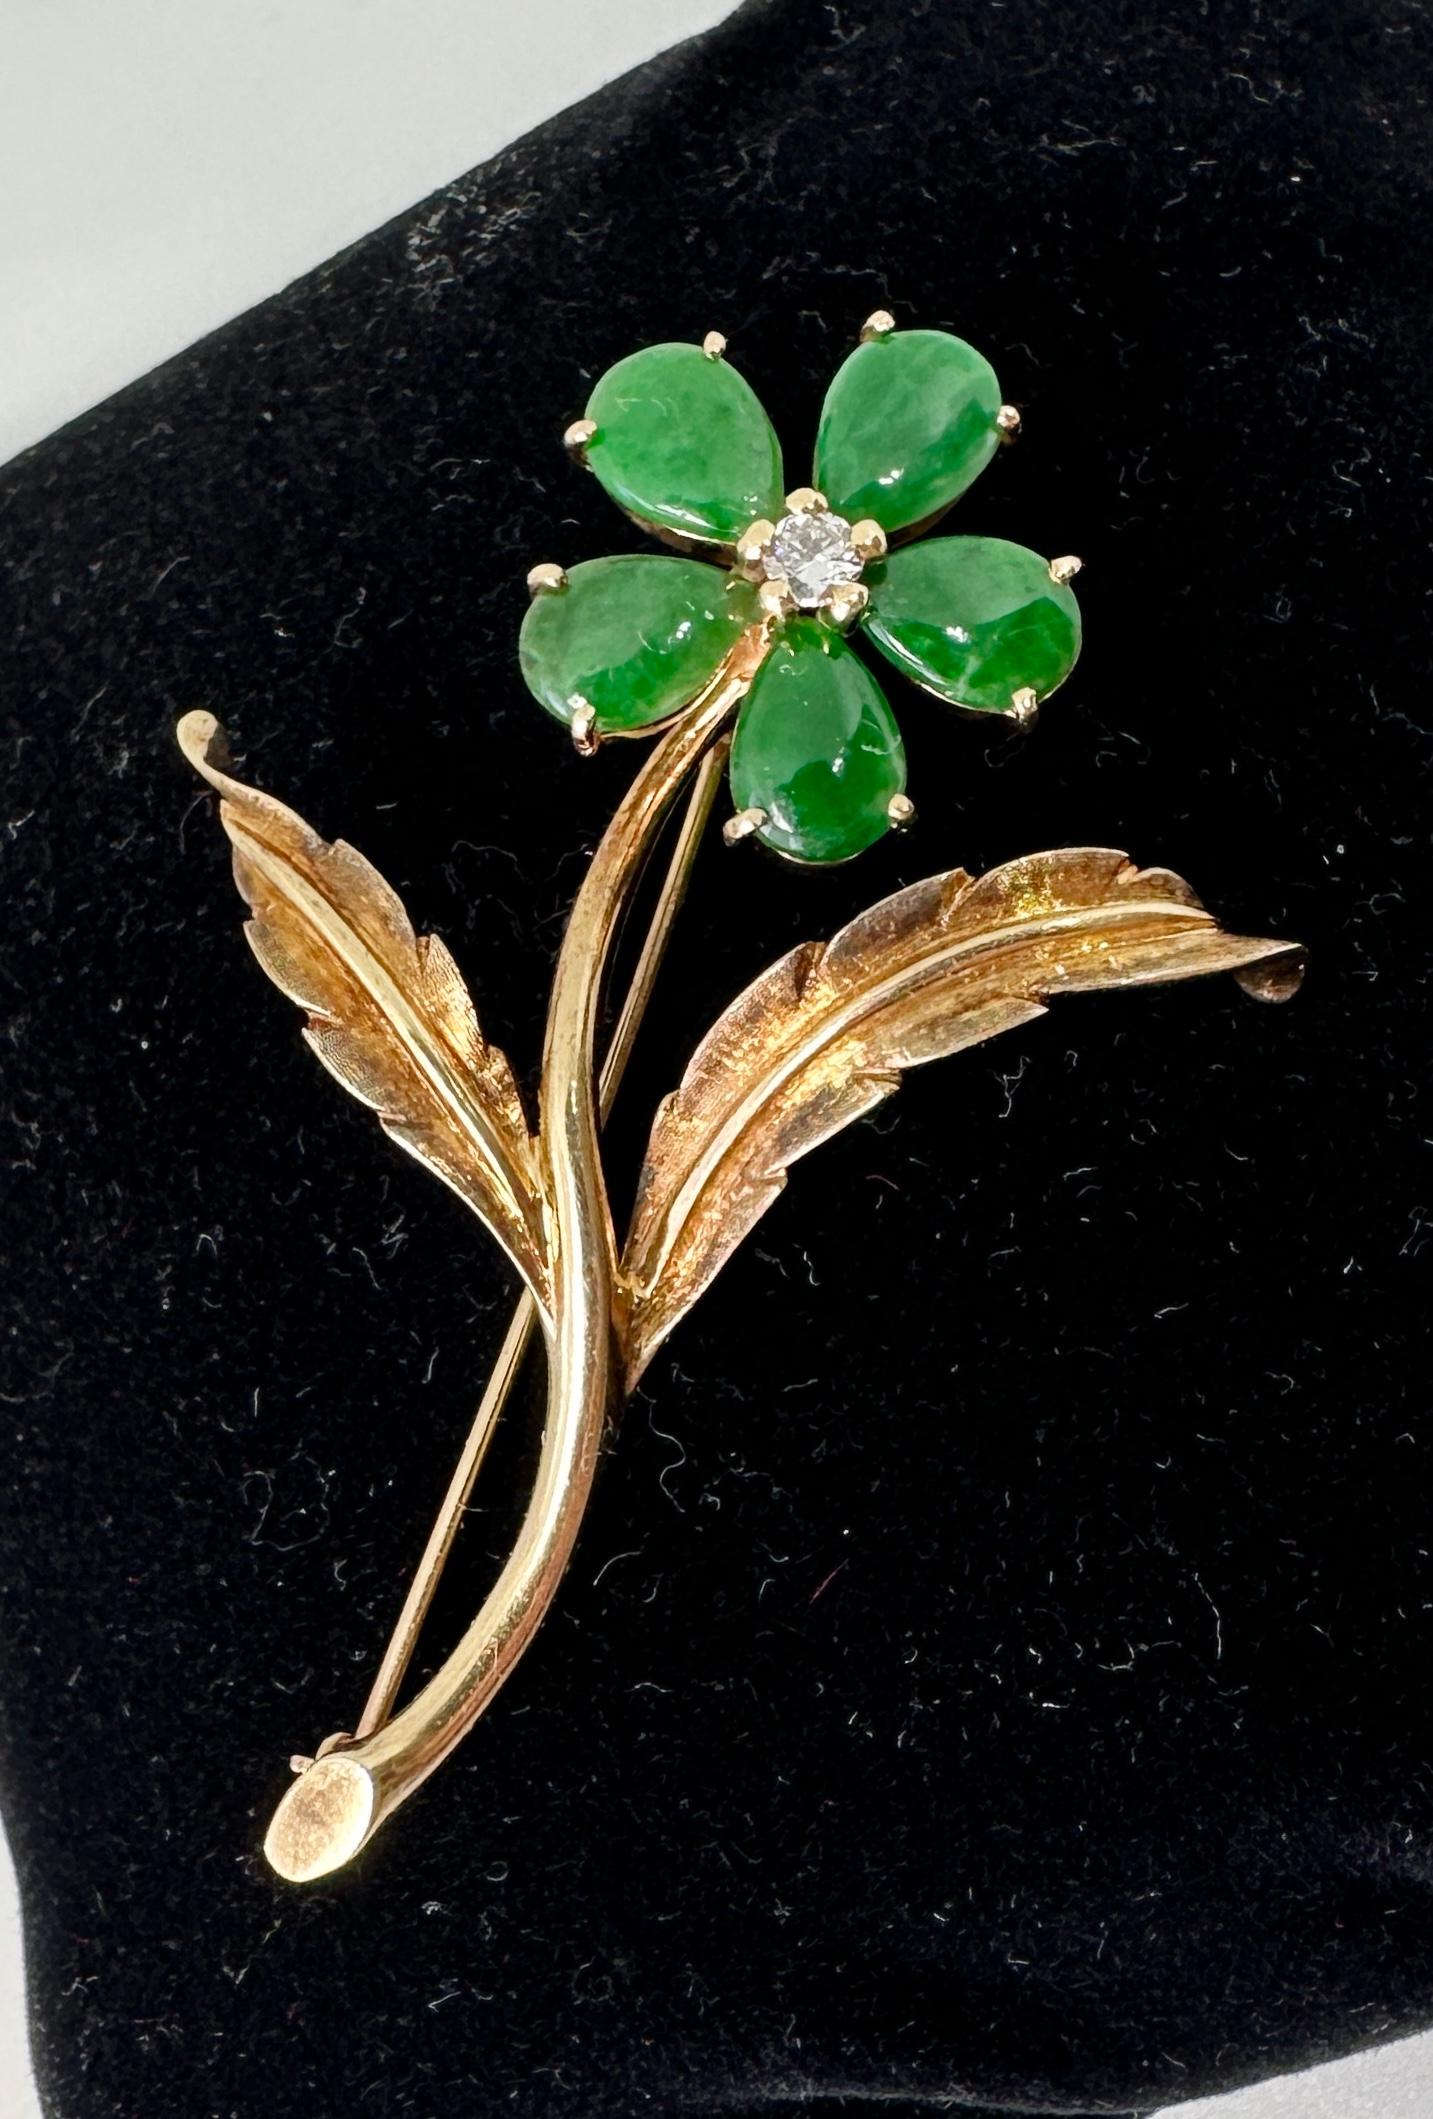 Cartier Retro Jade Diamond Flower Brooch 14 Karat Gold Antique Midcentury In Excellent Condition For Sale In New York, NY